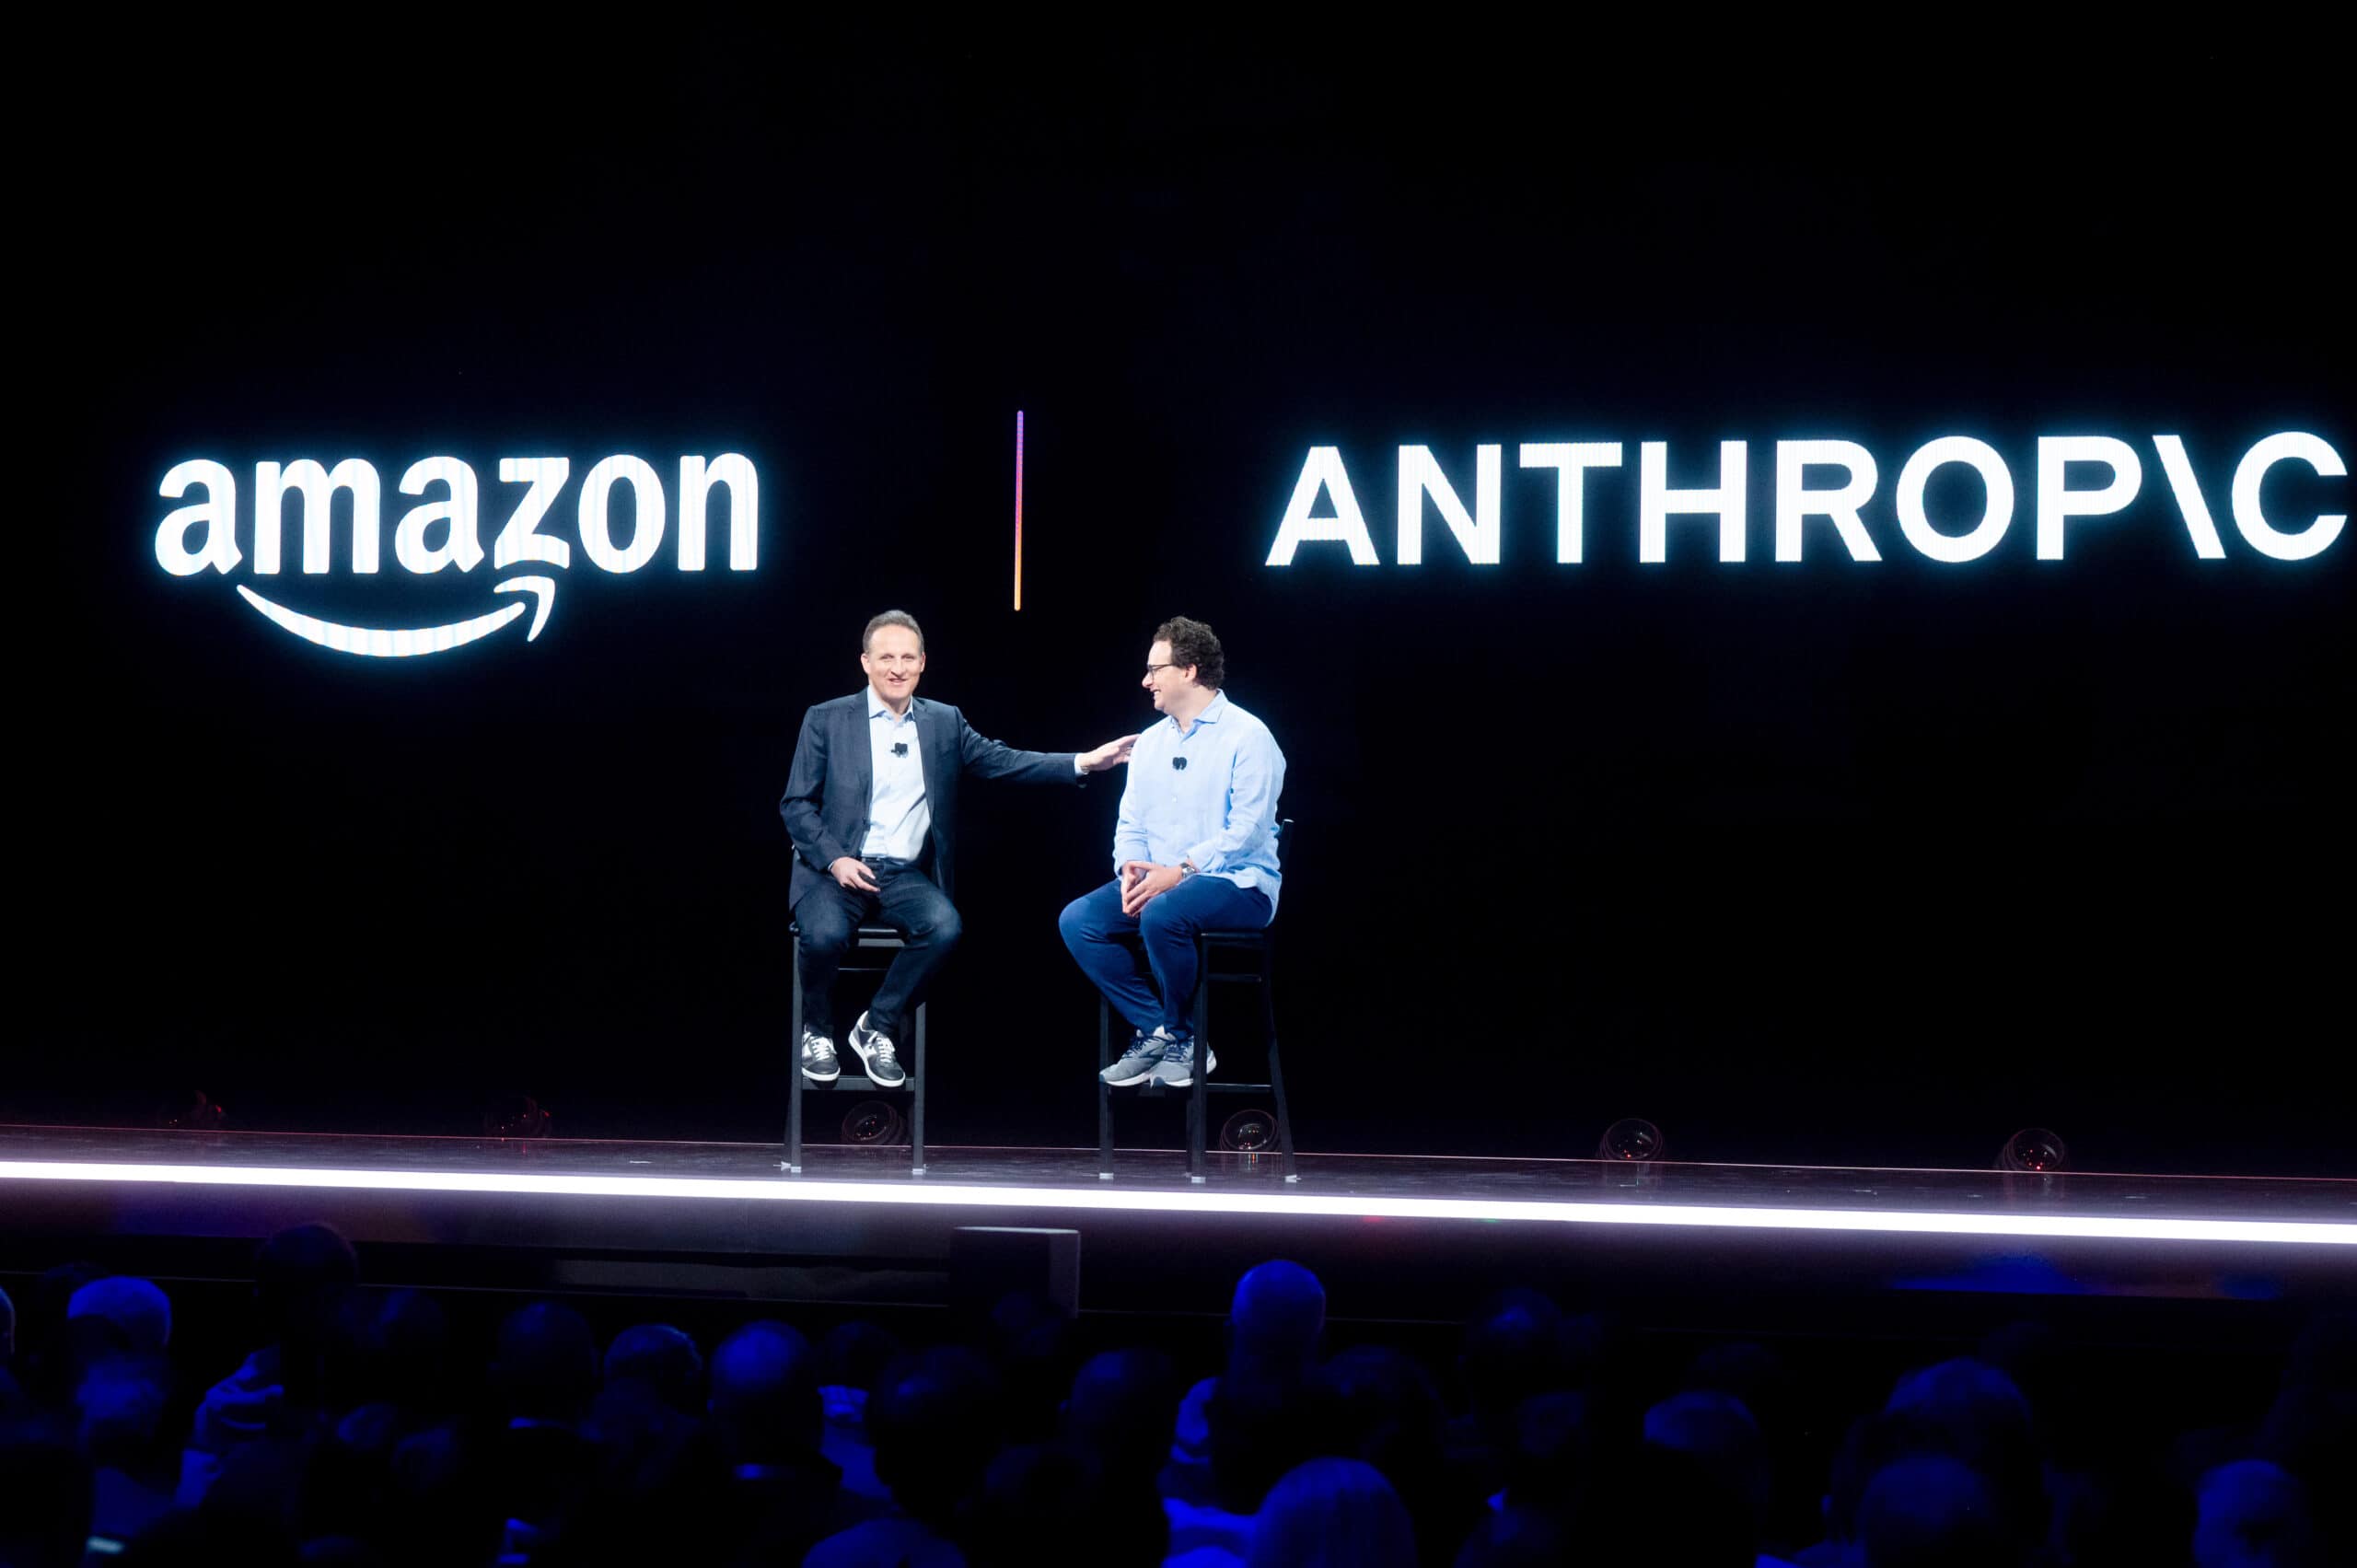 LAS VEGAS, NEVADA - NOVEMBER 28: Amazon Web Services (AWS) CEO Adam Selipsky speaks with Anthropic CEO and co-founder Dario Amodei during AWS re:Invent 2023, a conference hosted by Amazon Web Services, at The Venetian Las Vegas on November 28, 2023 in Las Vegas, Nevada.